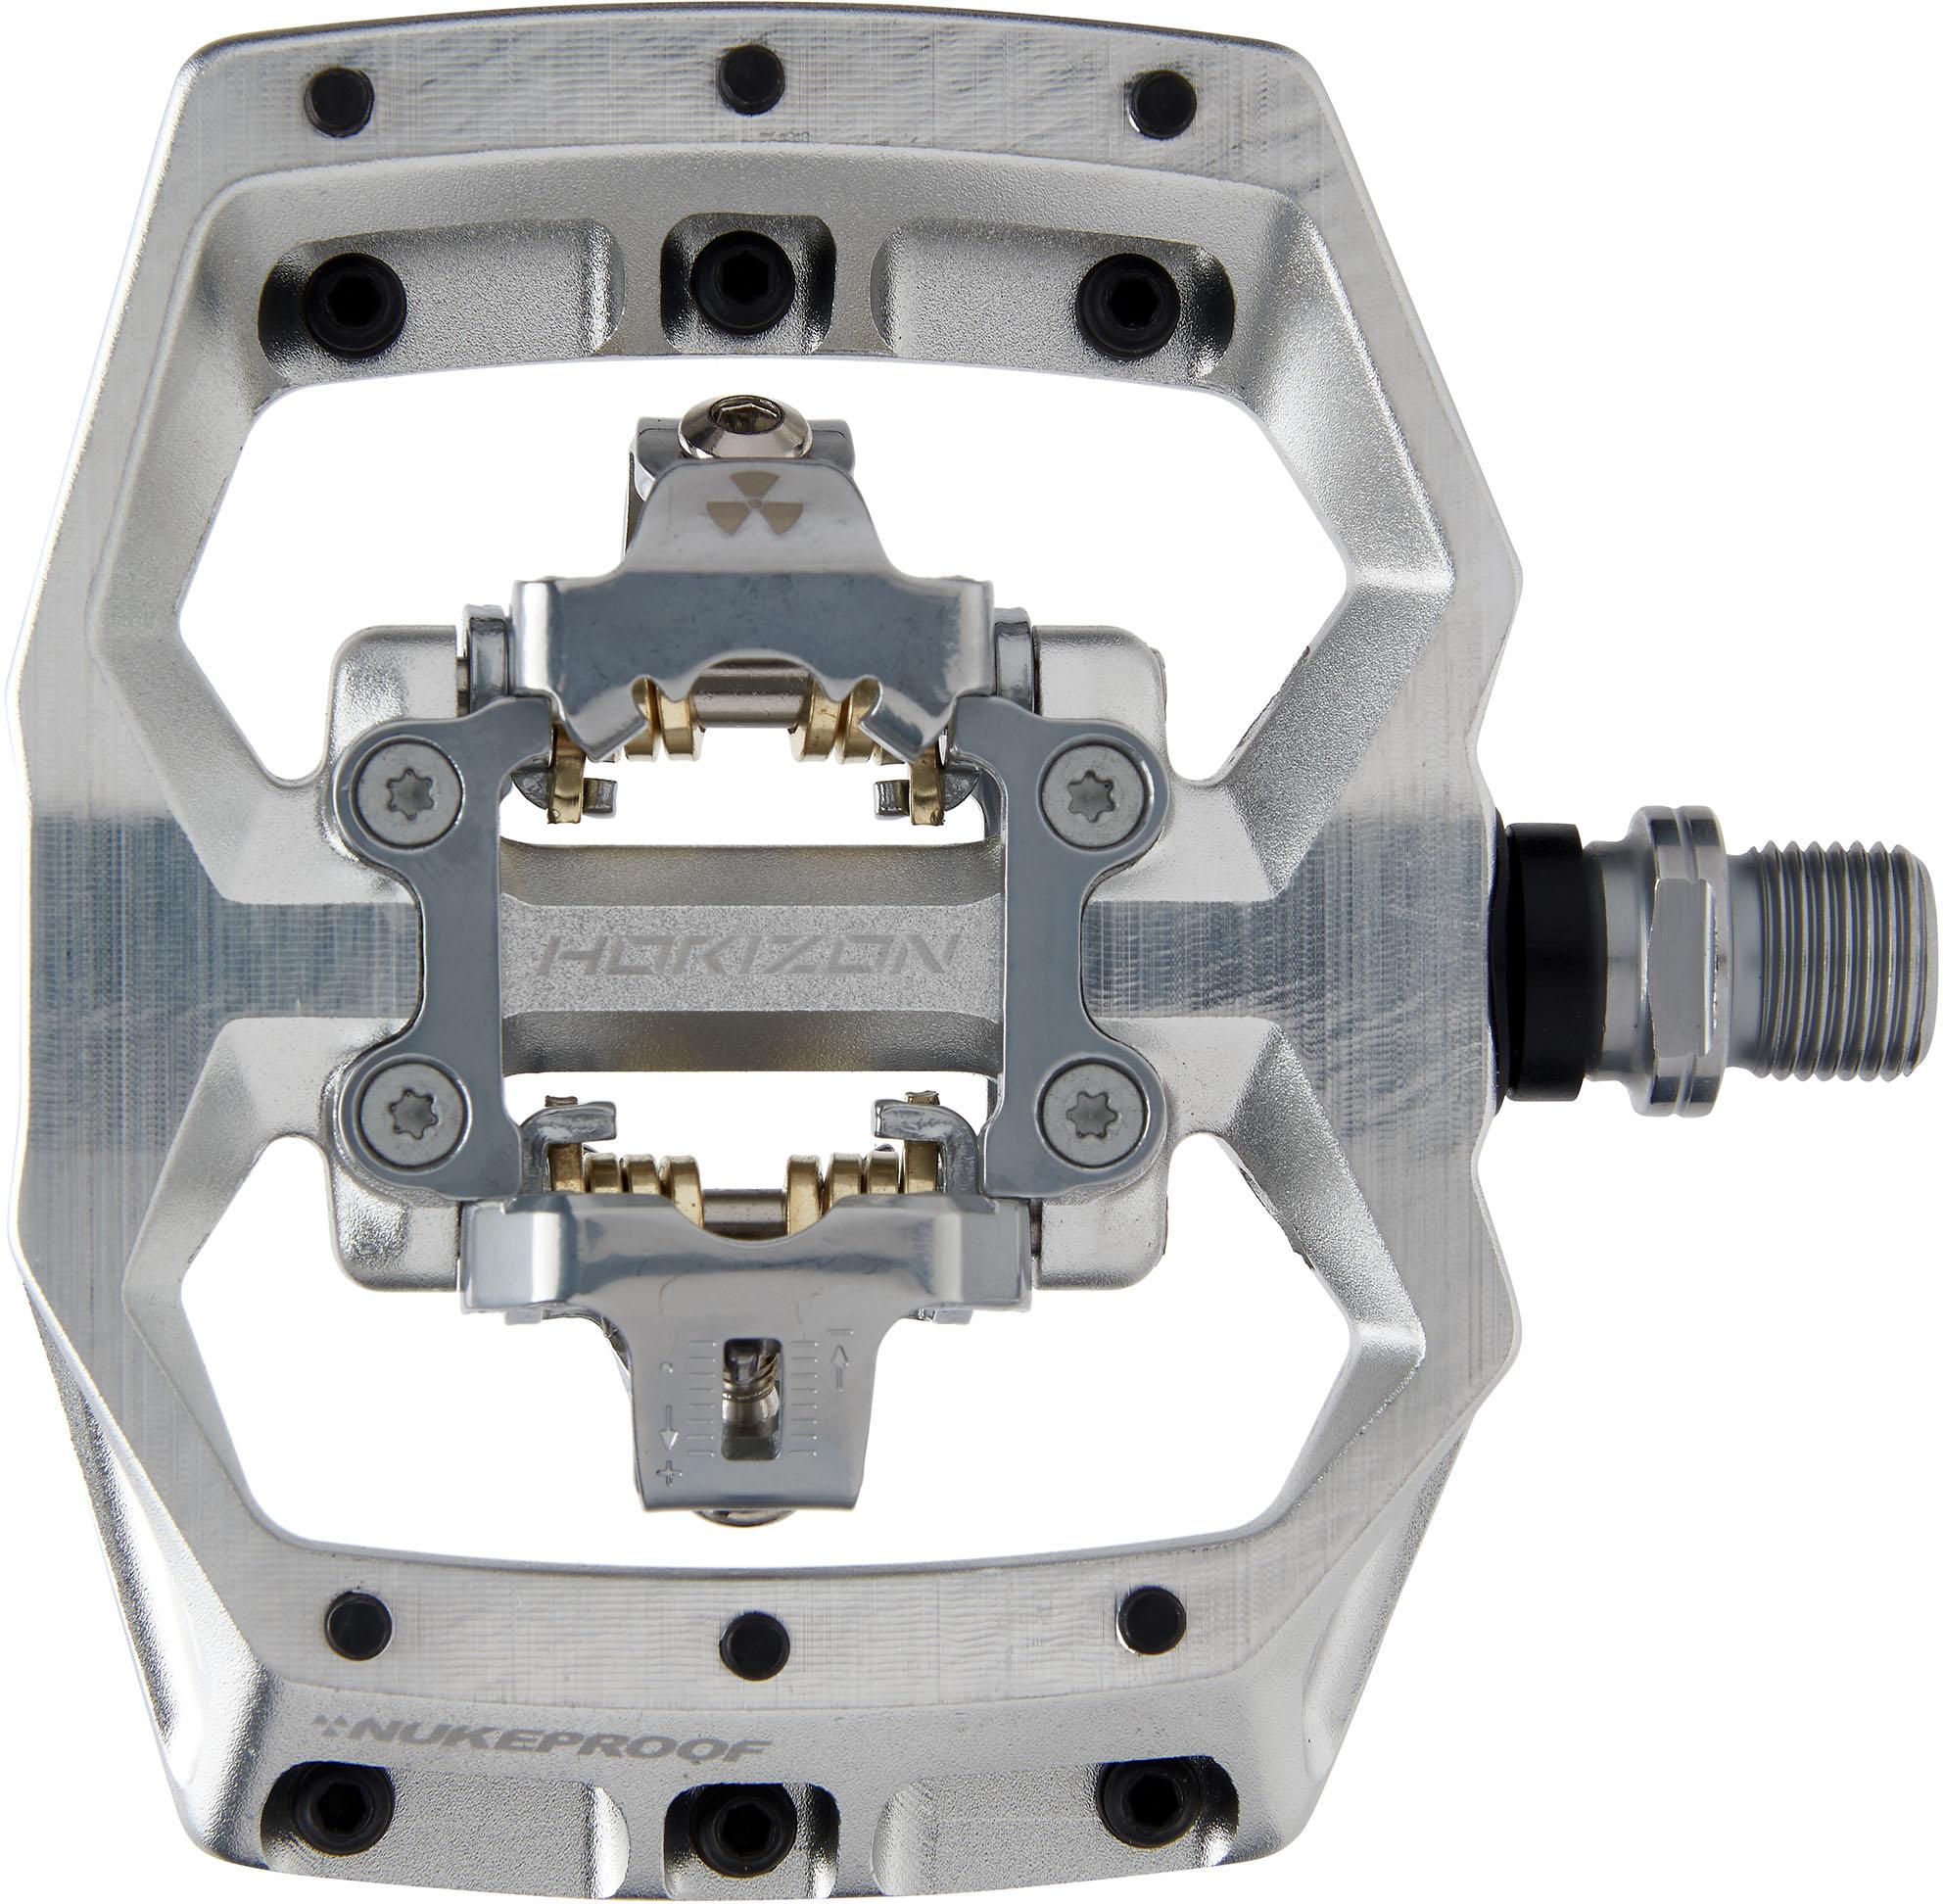 Nukeproof Horizon Cl Crmo Downhill Pedals - Silver